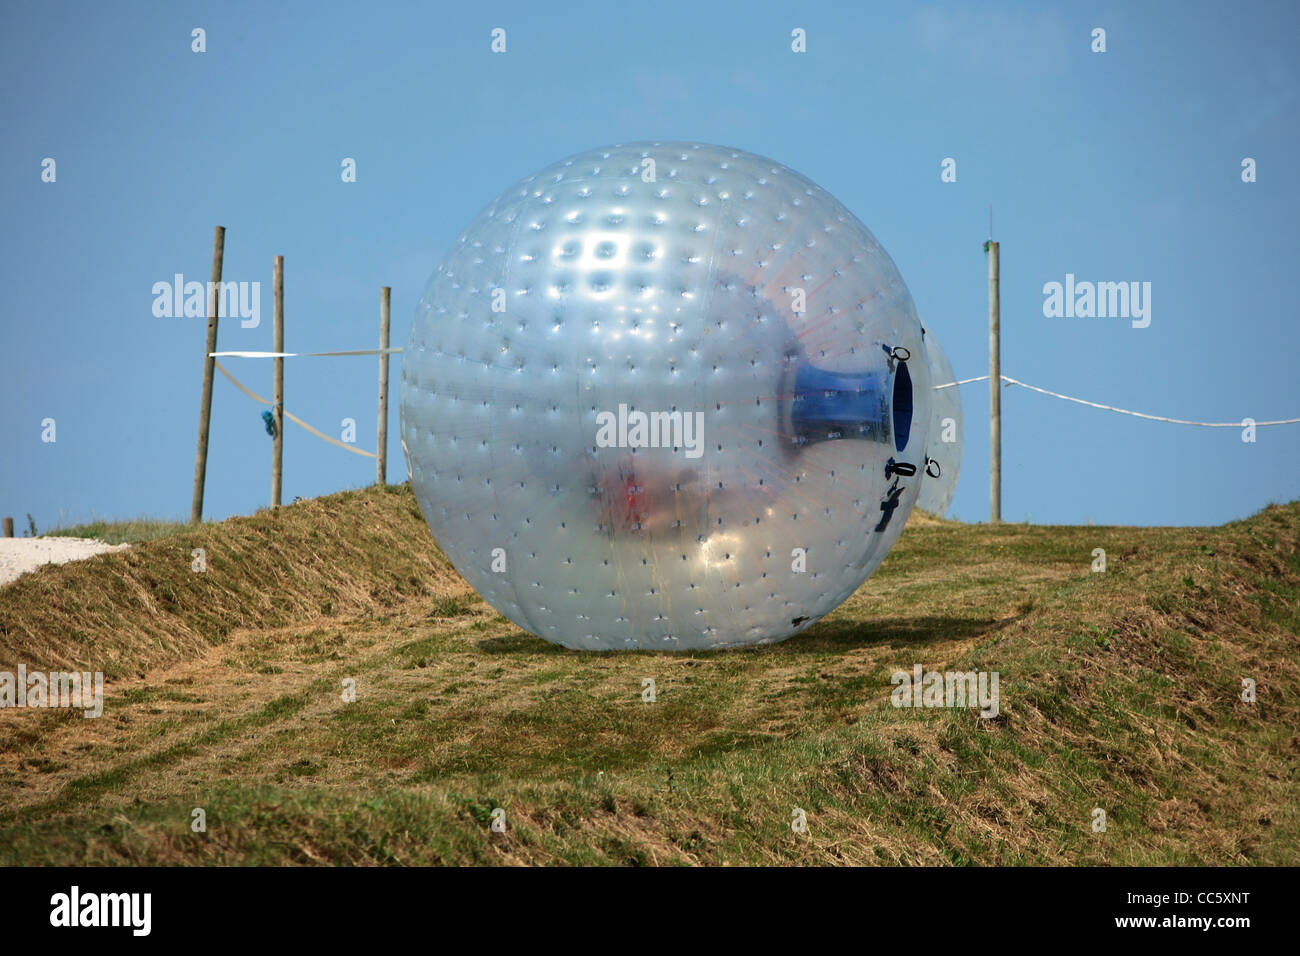 People enjoy Zorbing or Sphering on a hill in Dorset England. Stock Photo